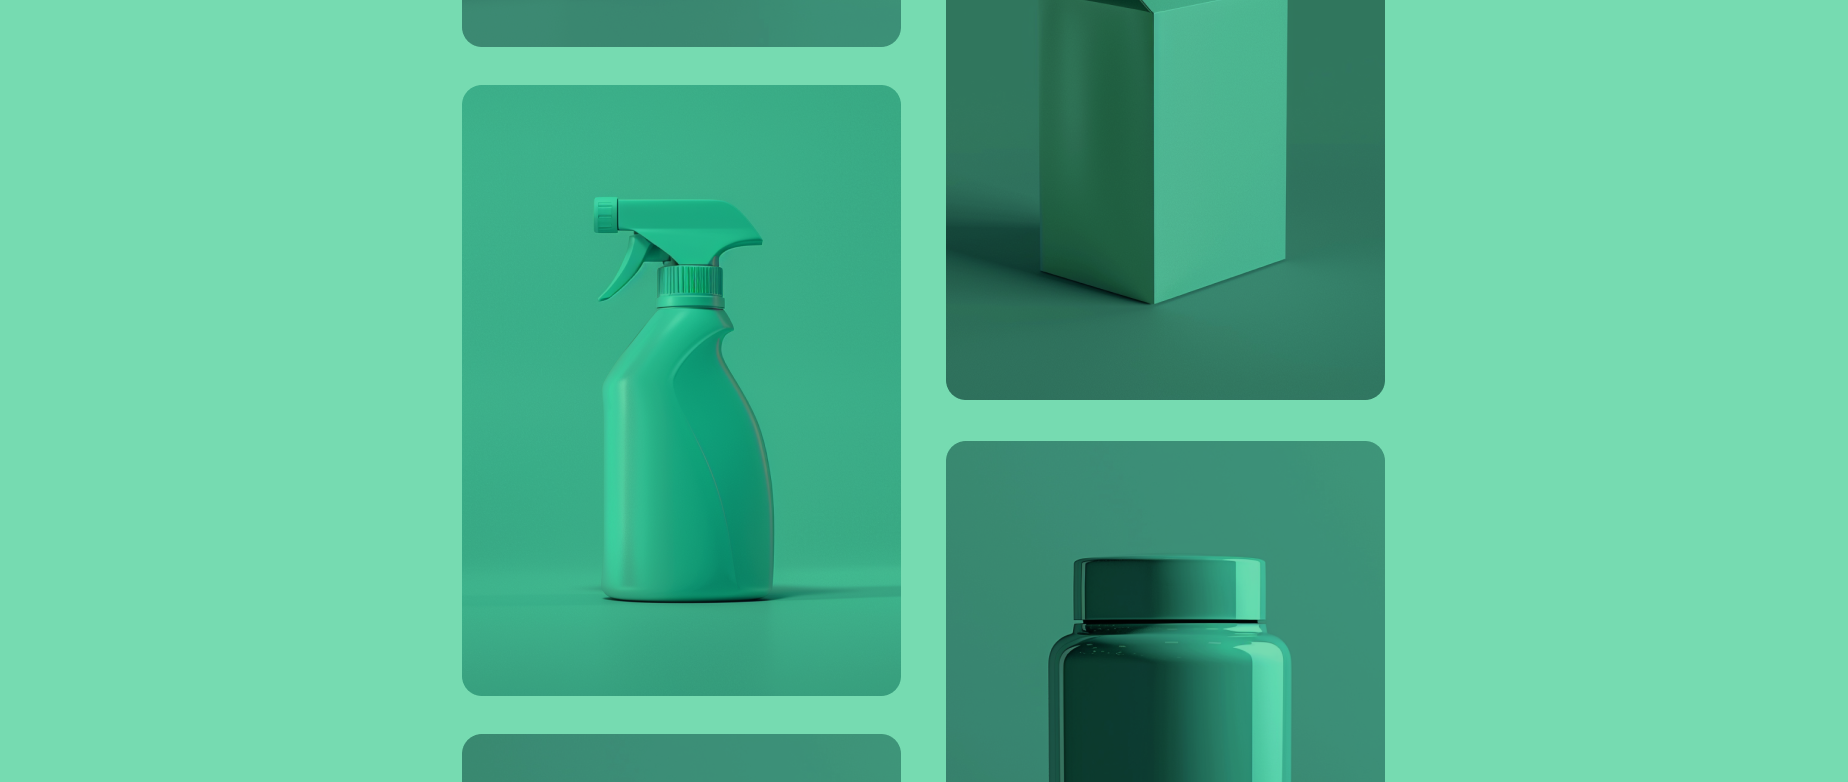 Various columns of panels with consumer product goods on an aqua background.